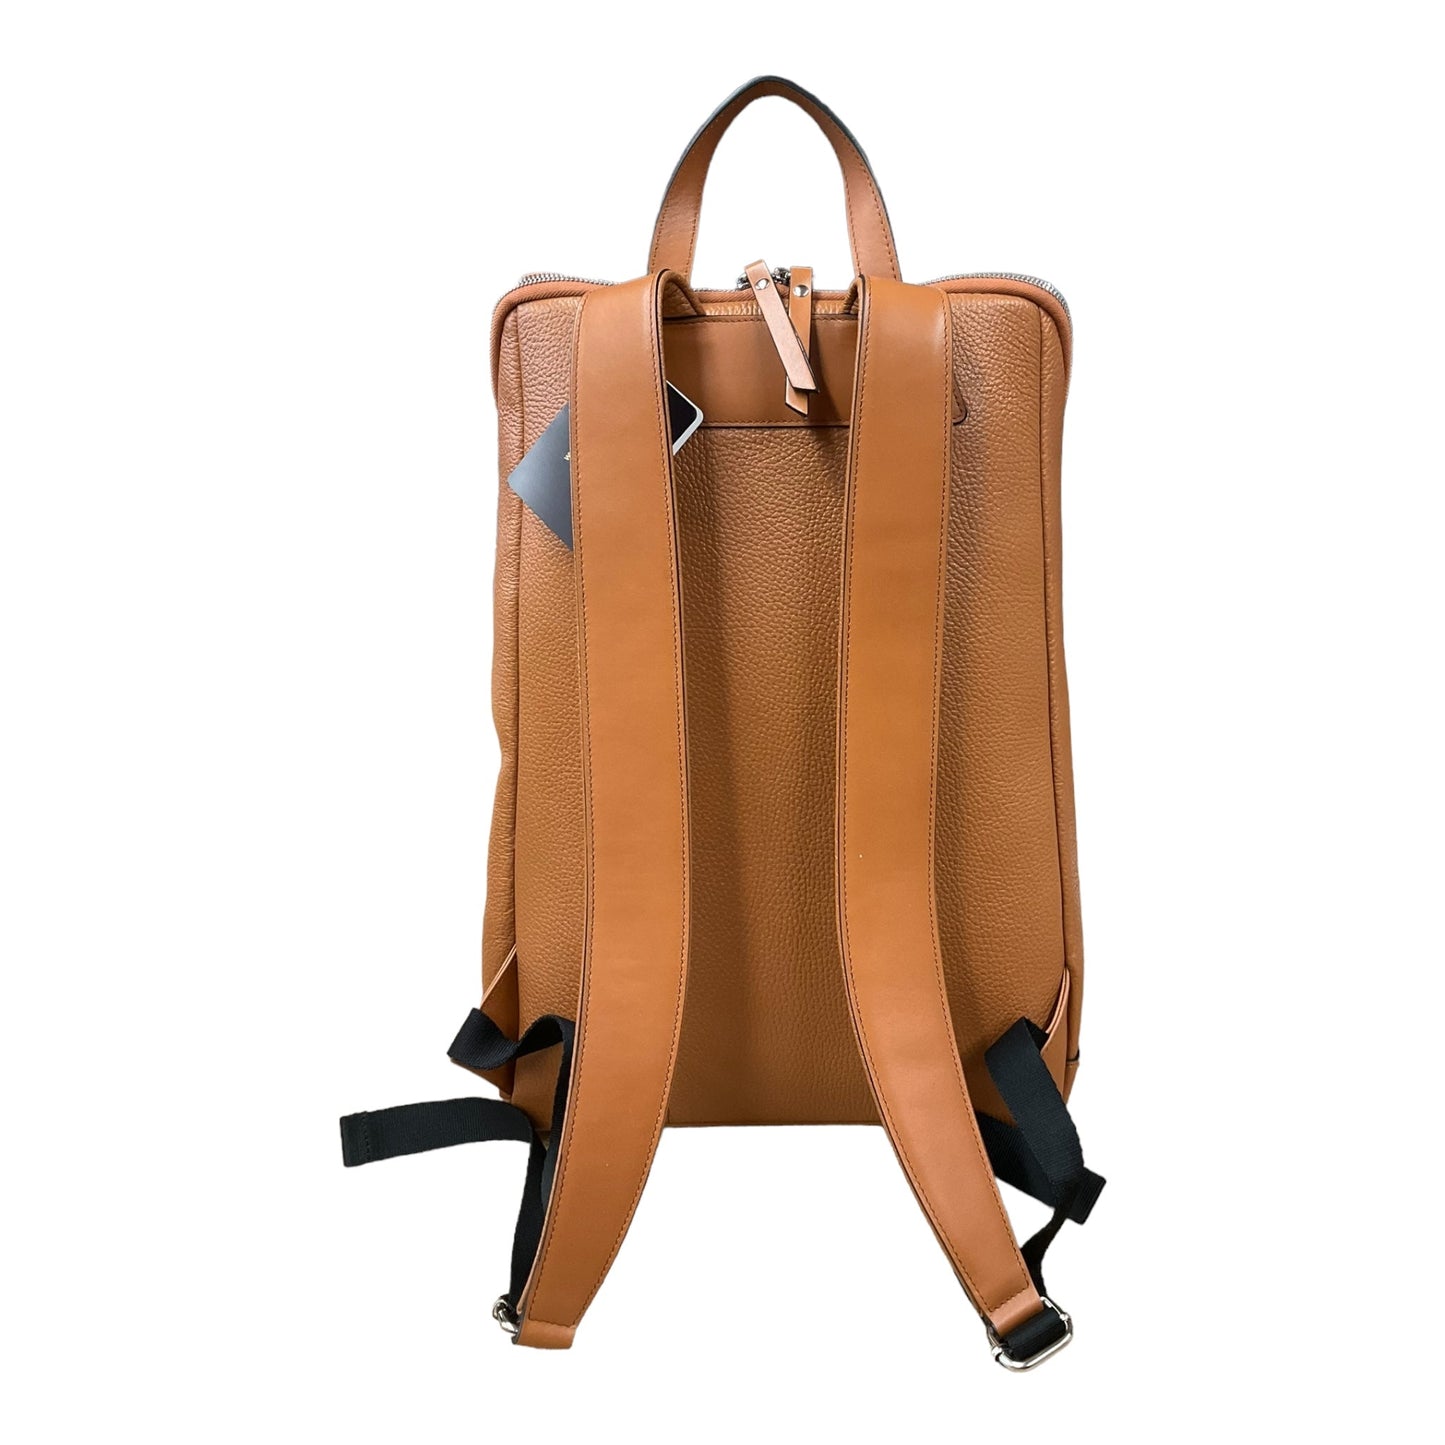 Backpack Leather By Cma  Size: Medium